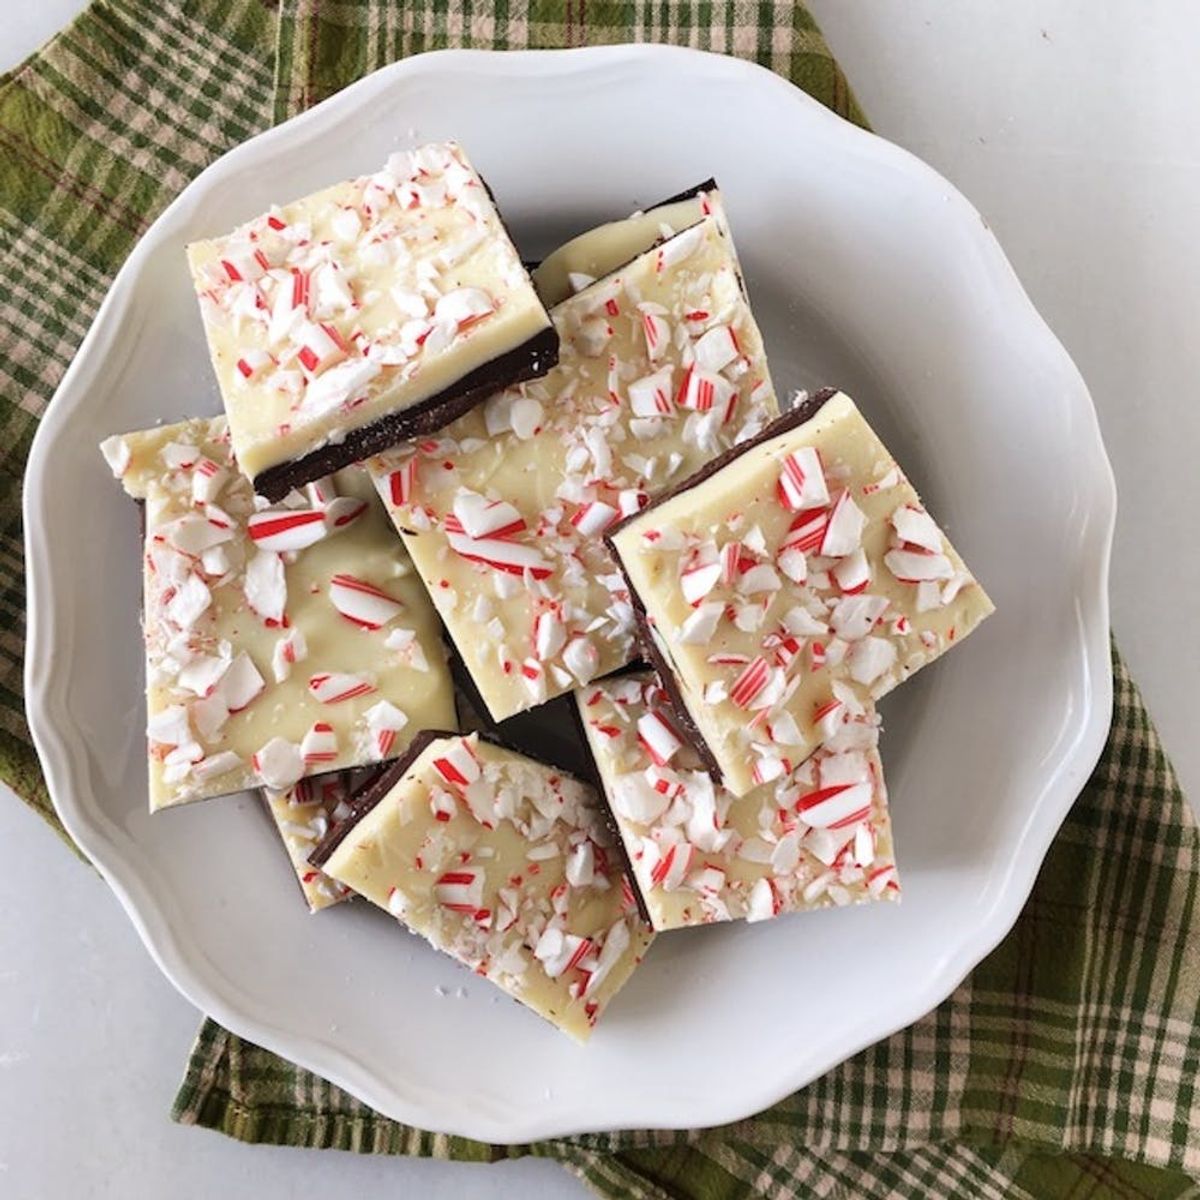 Ring in the Holidays With Our DIY Peppermint Bark